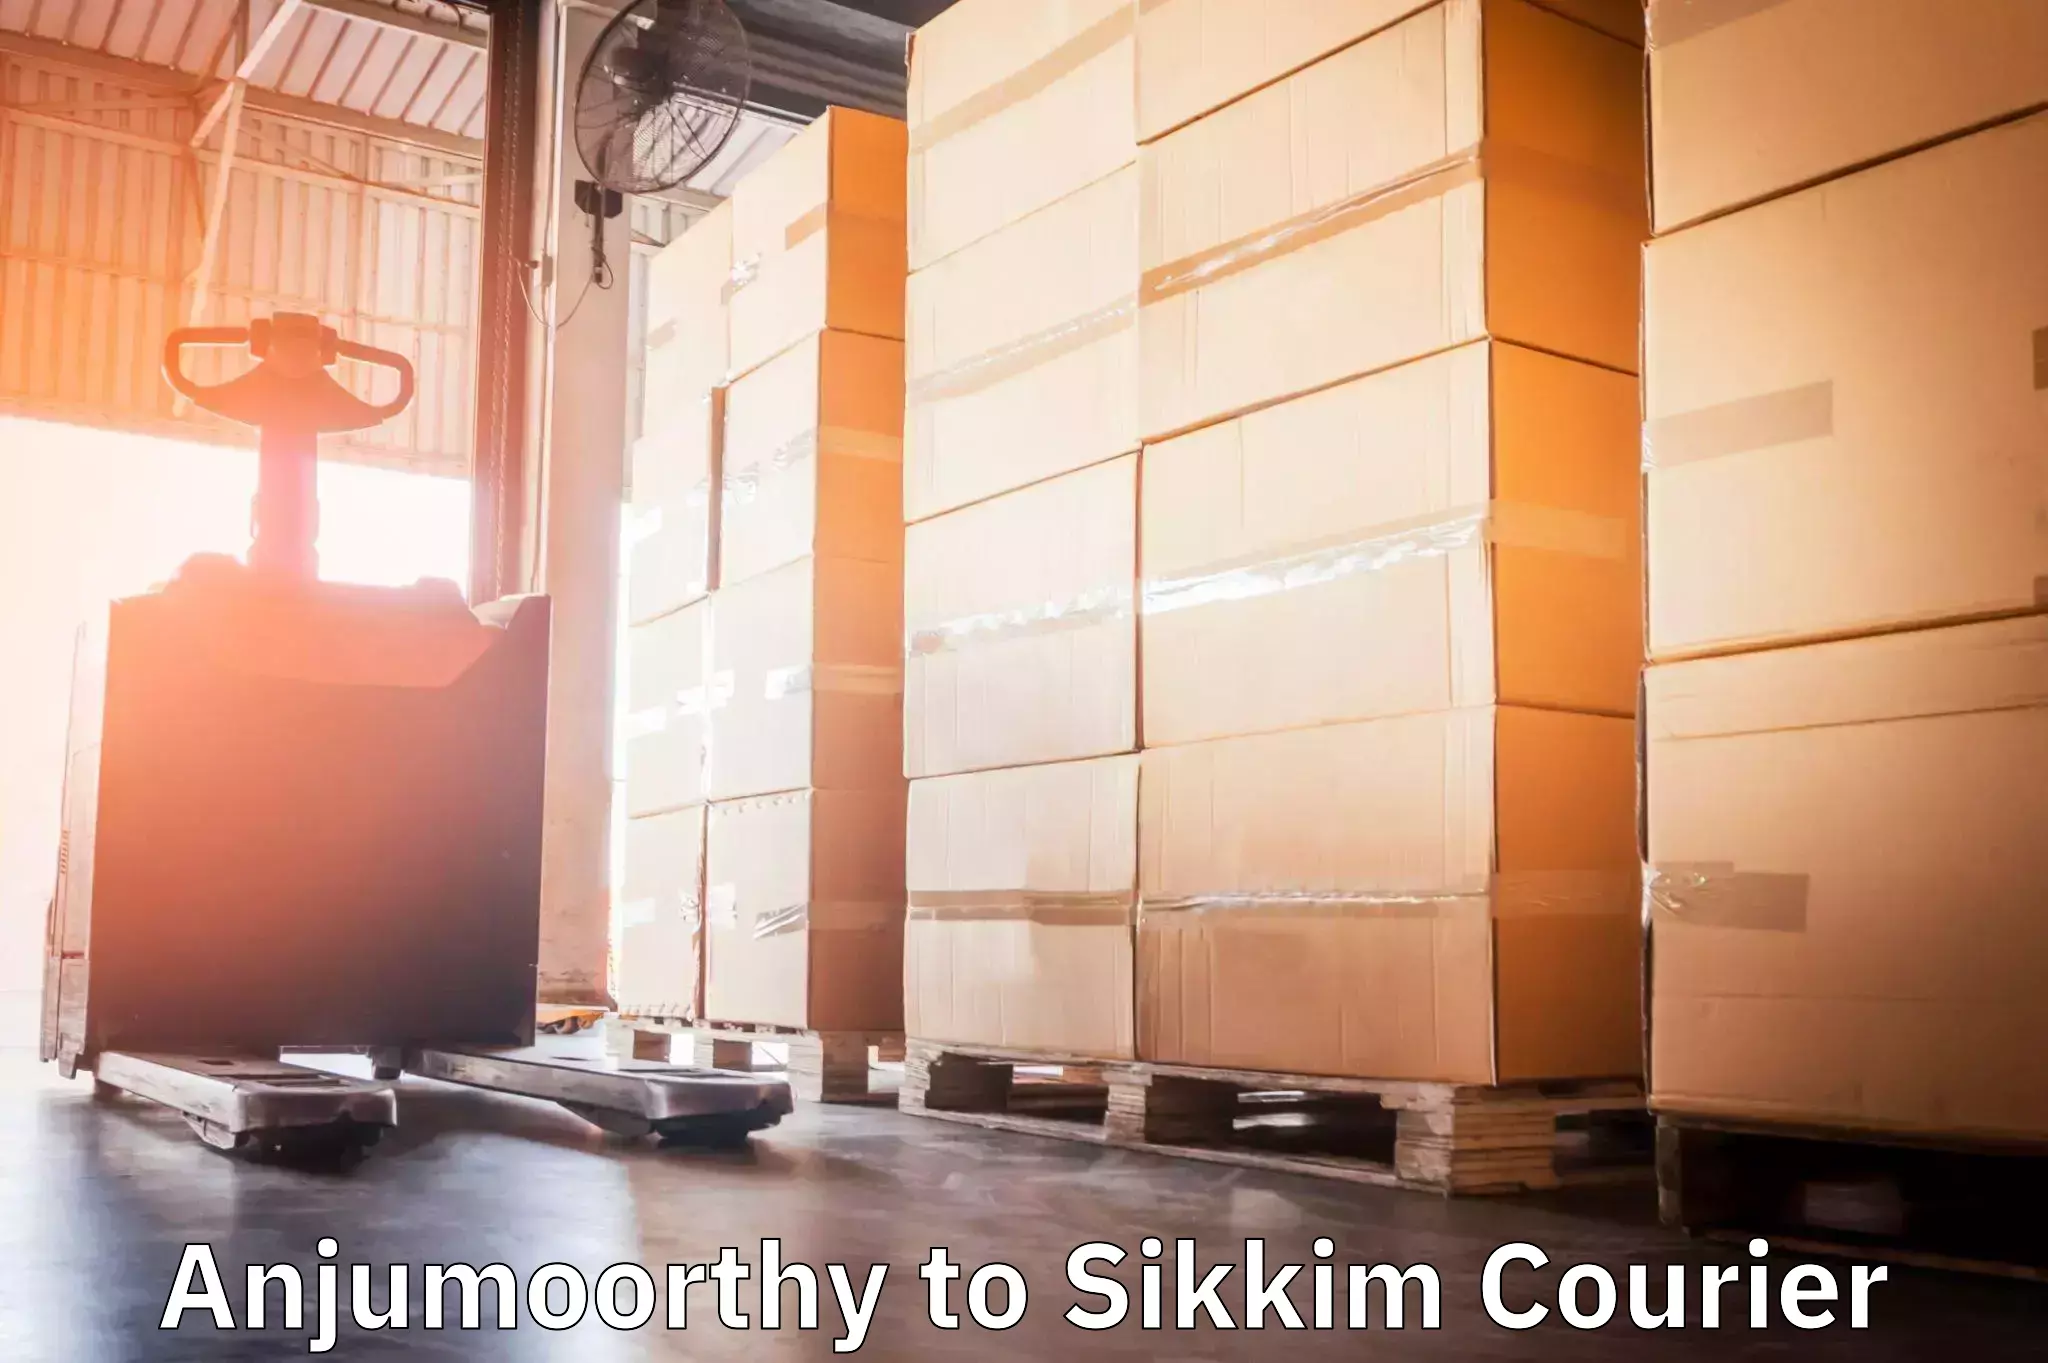 Urban courier service in Anjumoorthy to South Sikkim